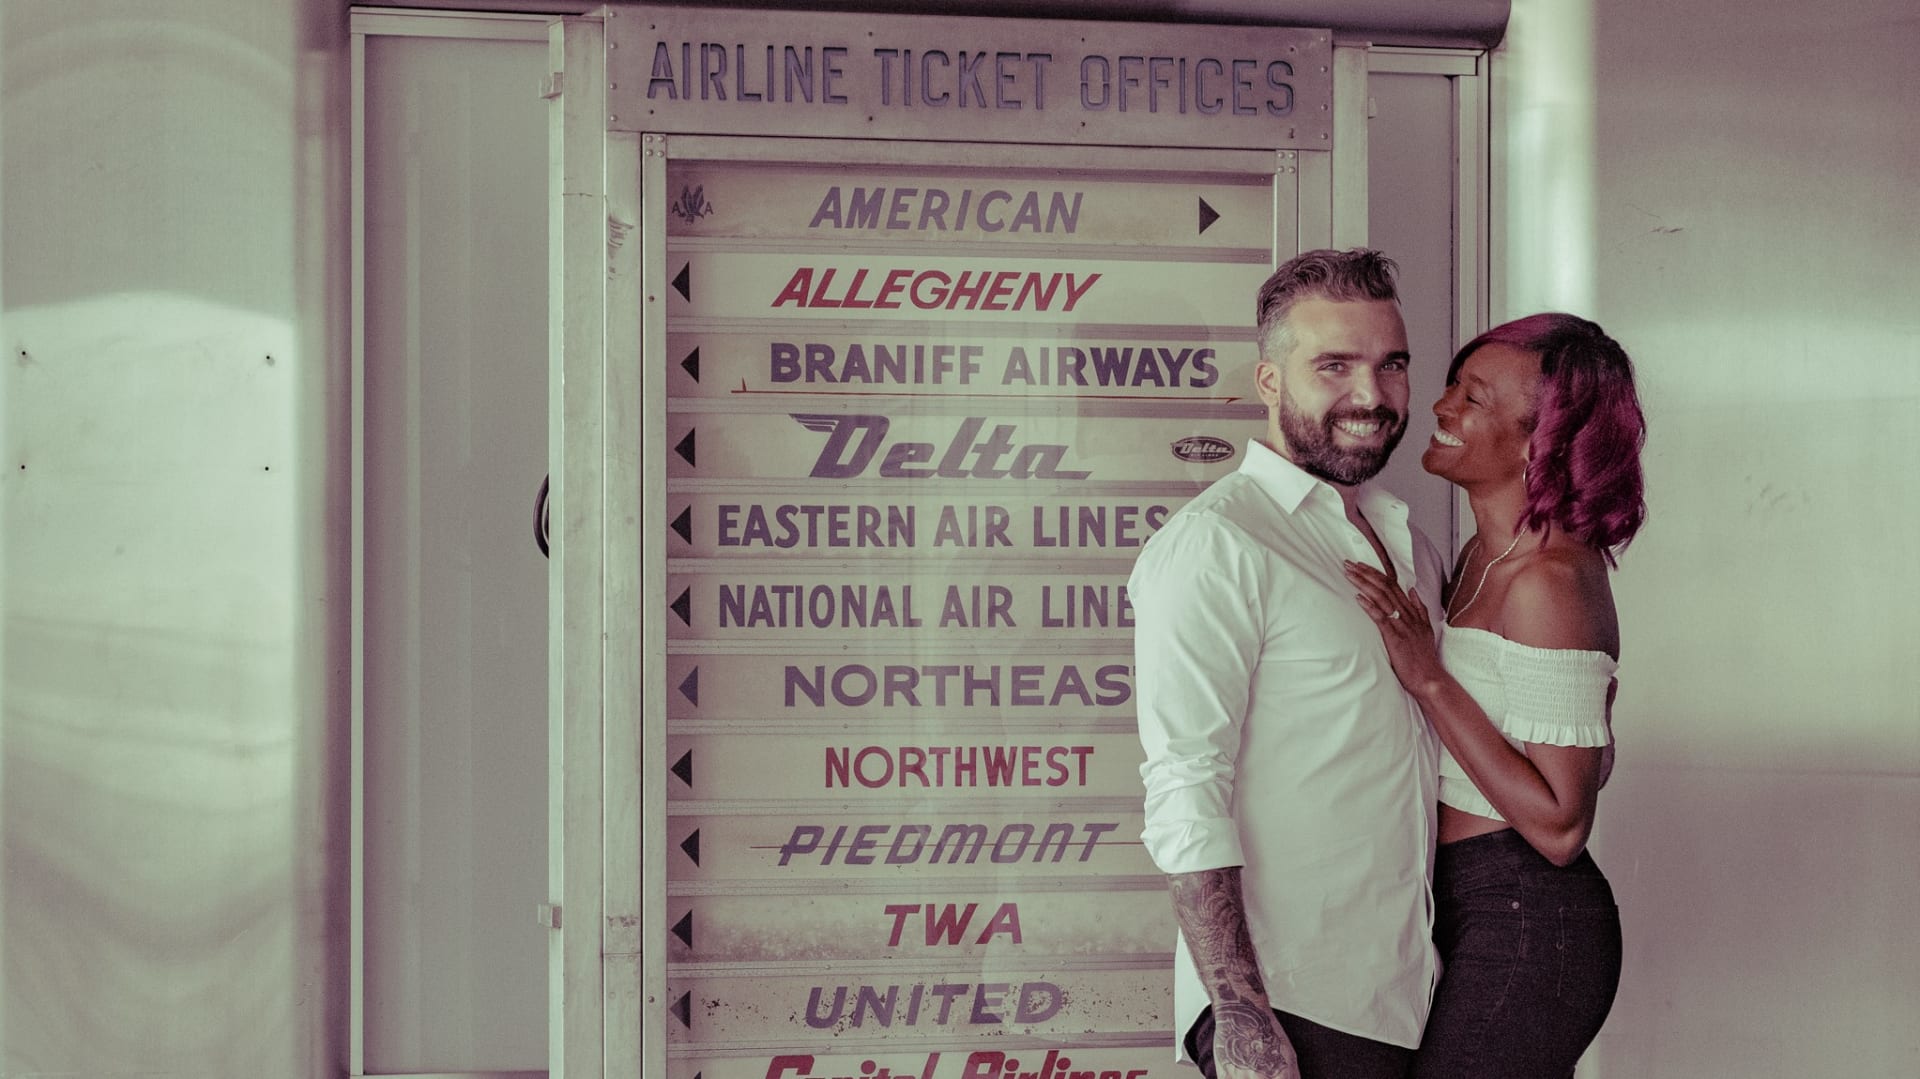 Romance in the air... how did two strangers fall in love on a plane?